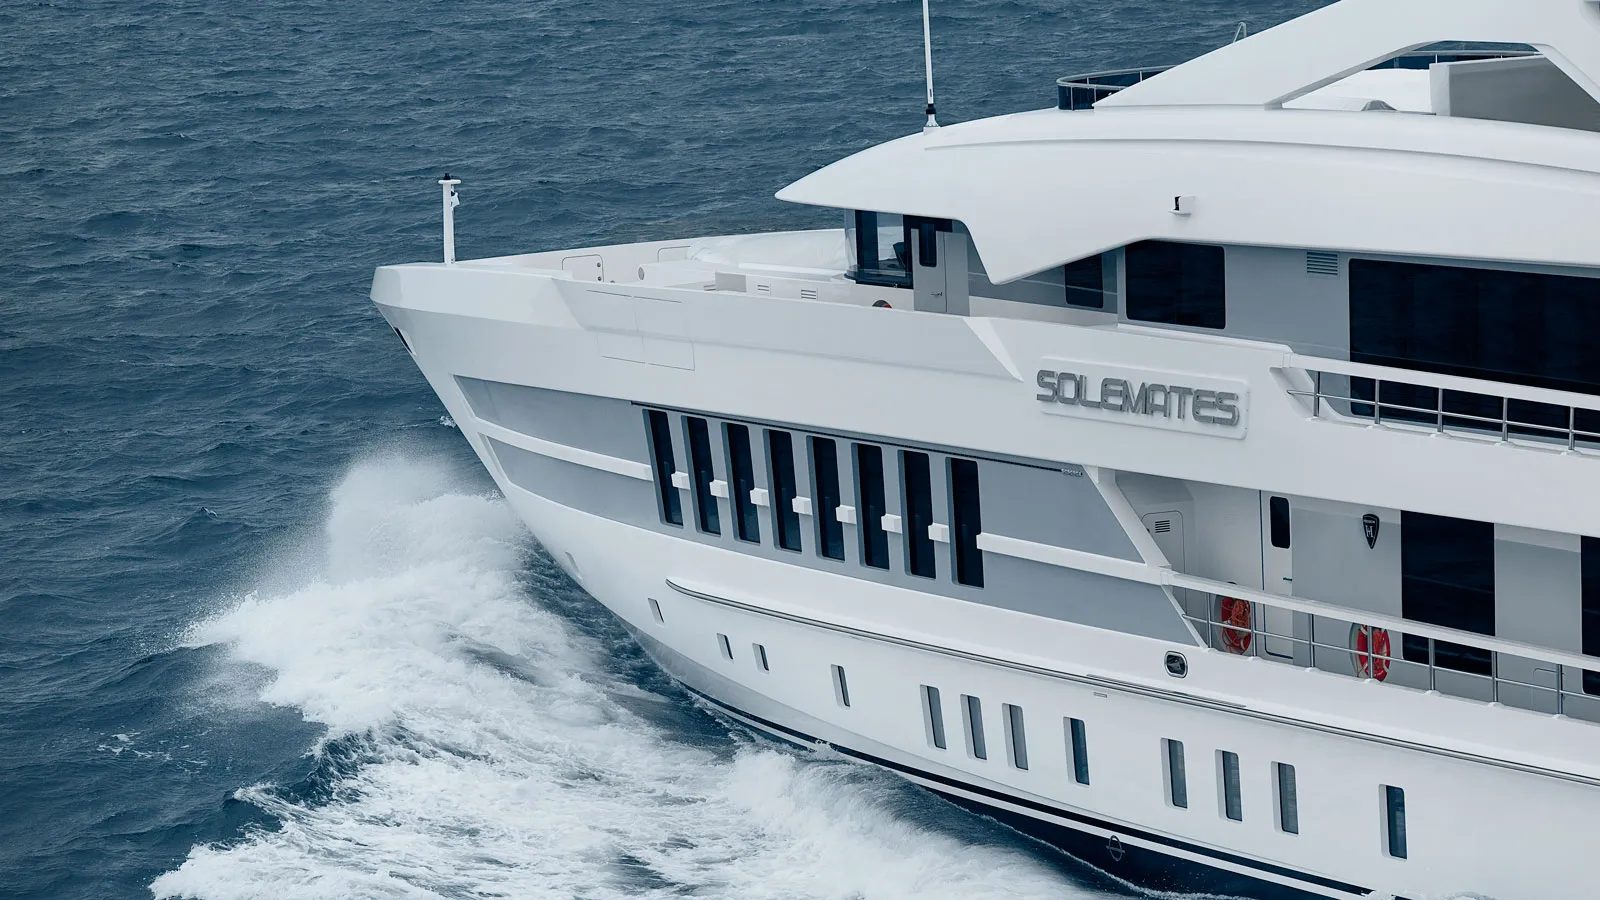 Superiate Heesen Solemates - boat shopping 